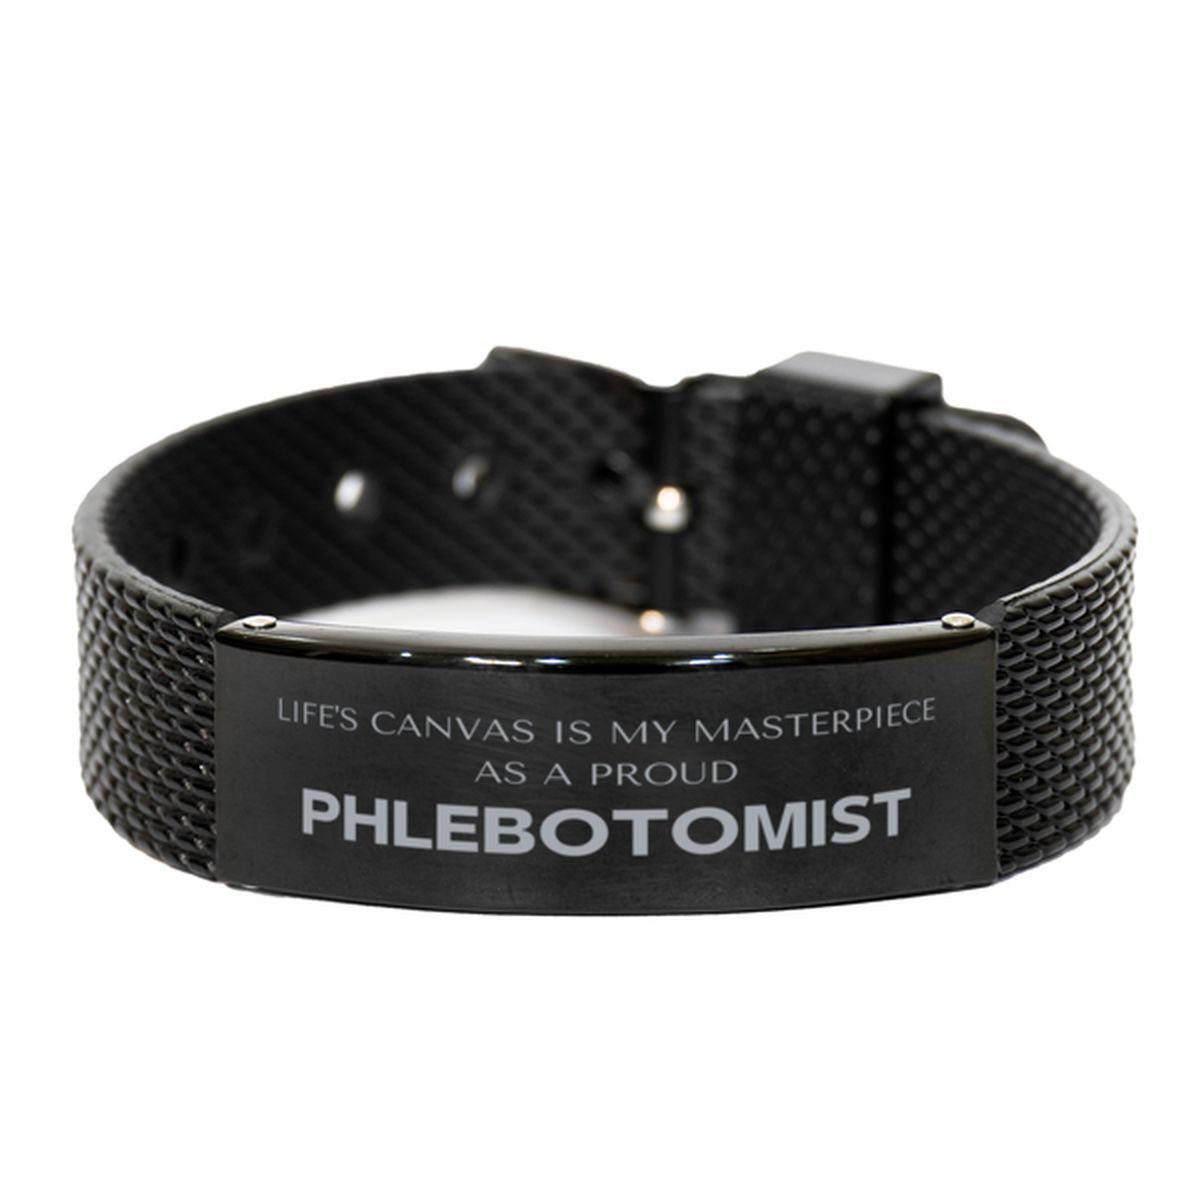 Proud Phlebotomist Gifts, Life's canvas is my masterpiece, Epic Birthday Christmas Unique Black Shark Mesh Bracelet For Phlebotomist, Coworkers, Men, Women, Friends